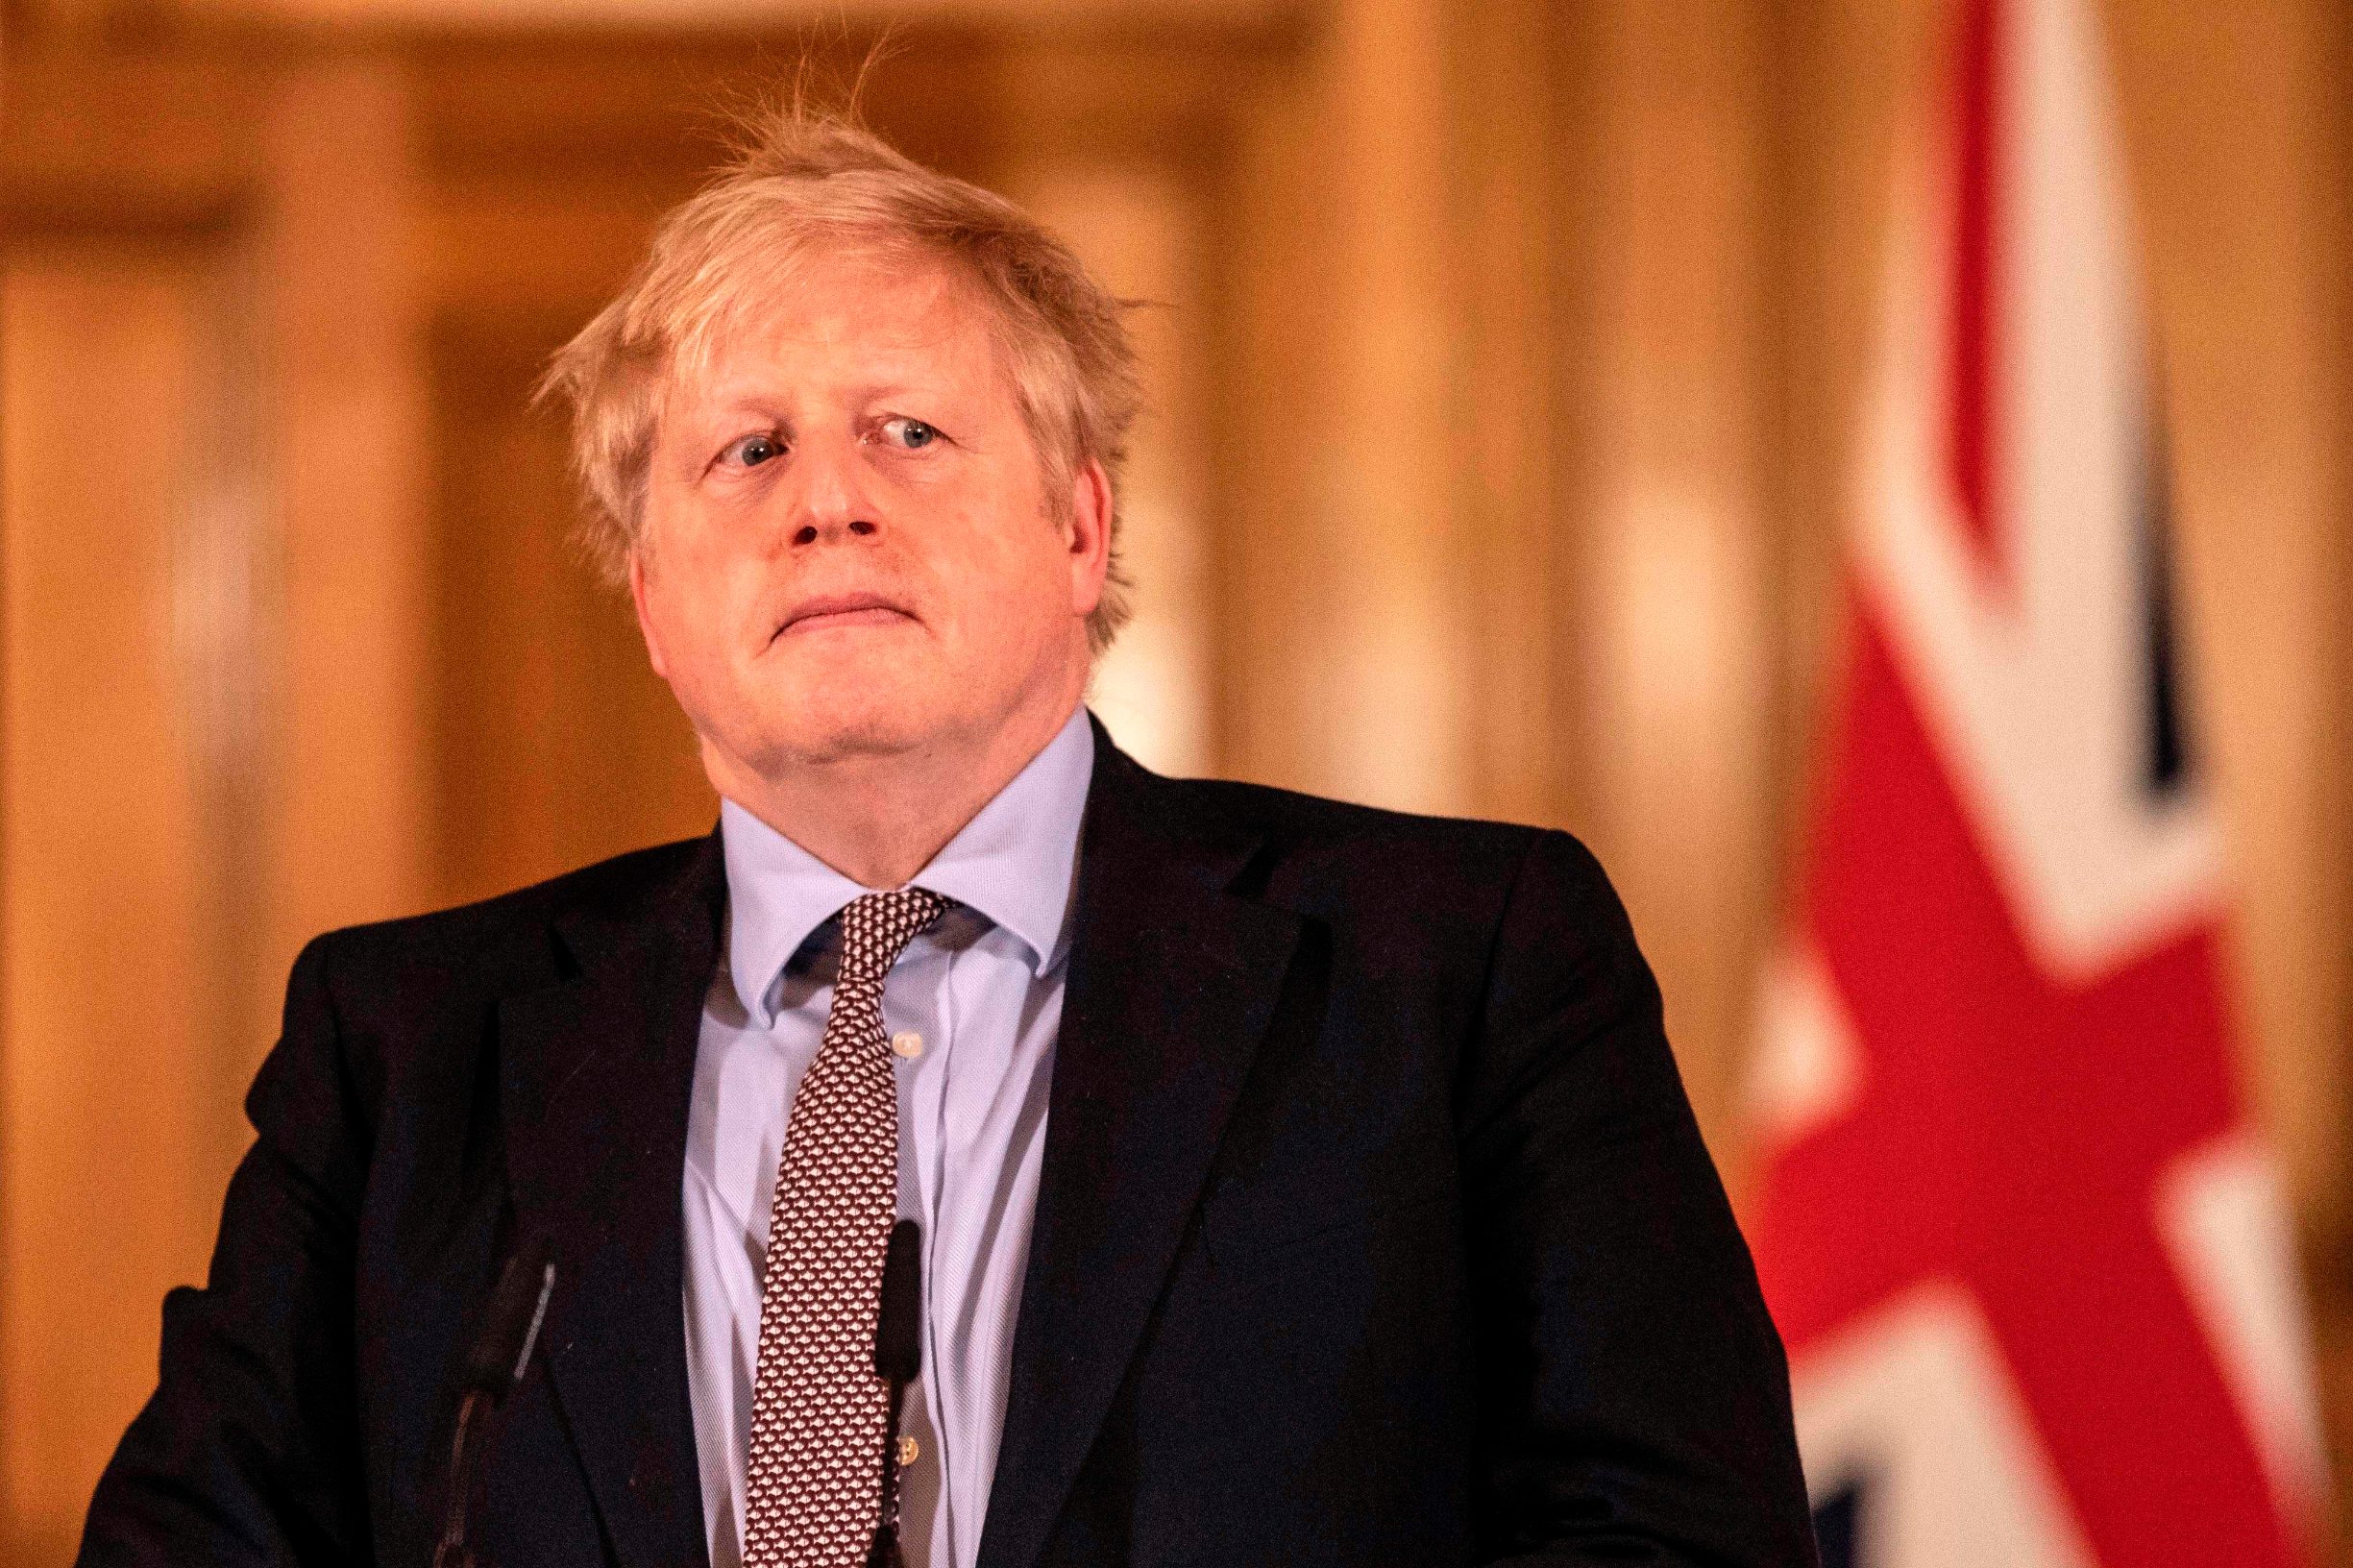 TOPSHOT - Prime Minister Boris Johnson gives a press conference on the ongoing COVID-19 situation in London on March 16, 2020. (Photo by Richard Pohle / POOL / AFP)